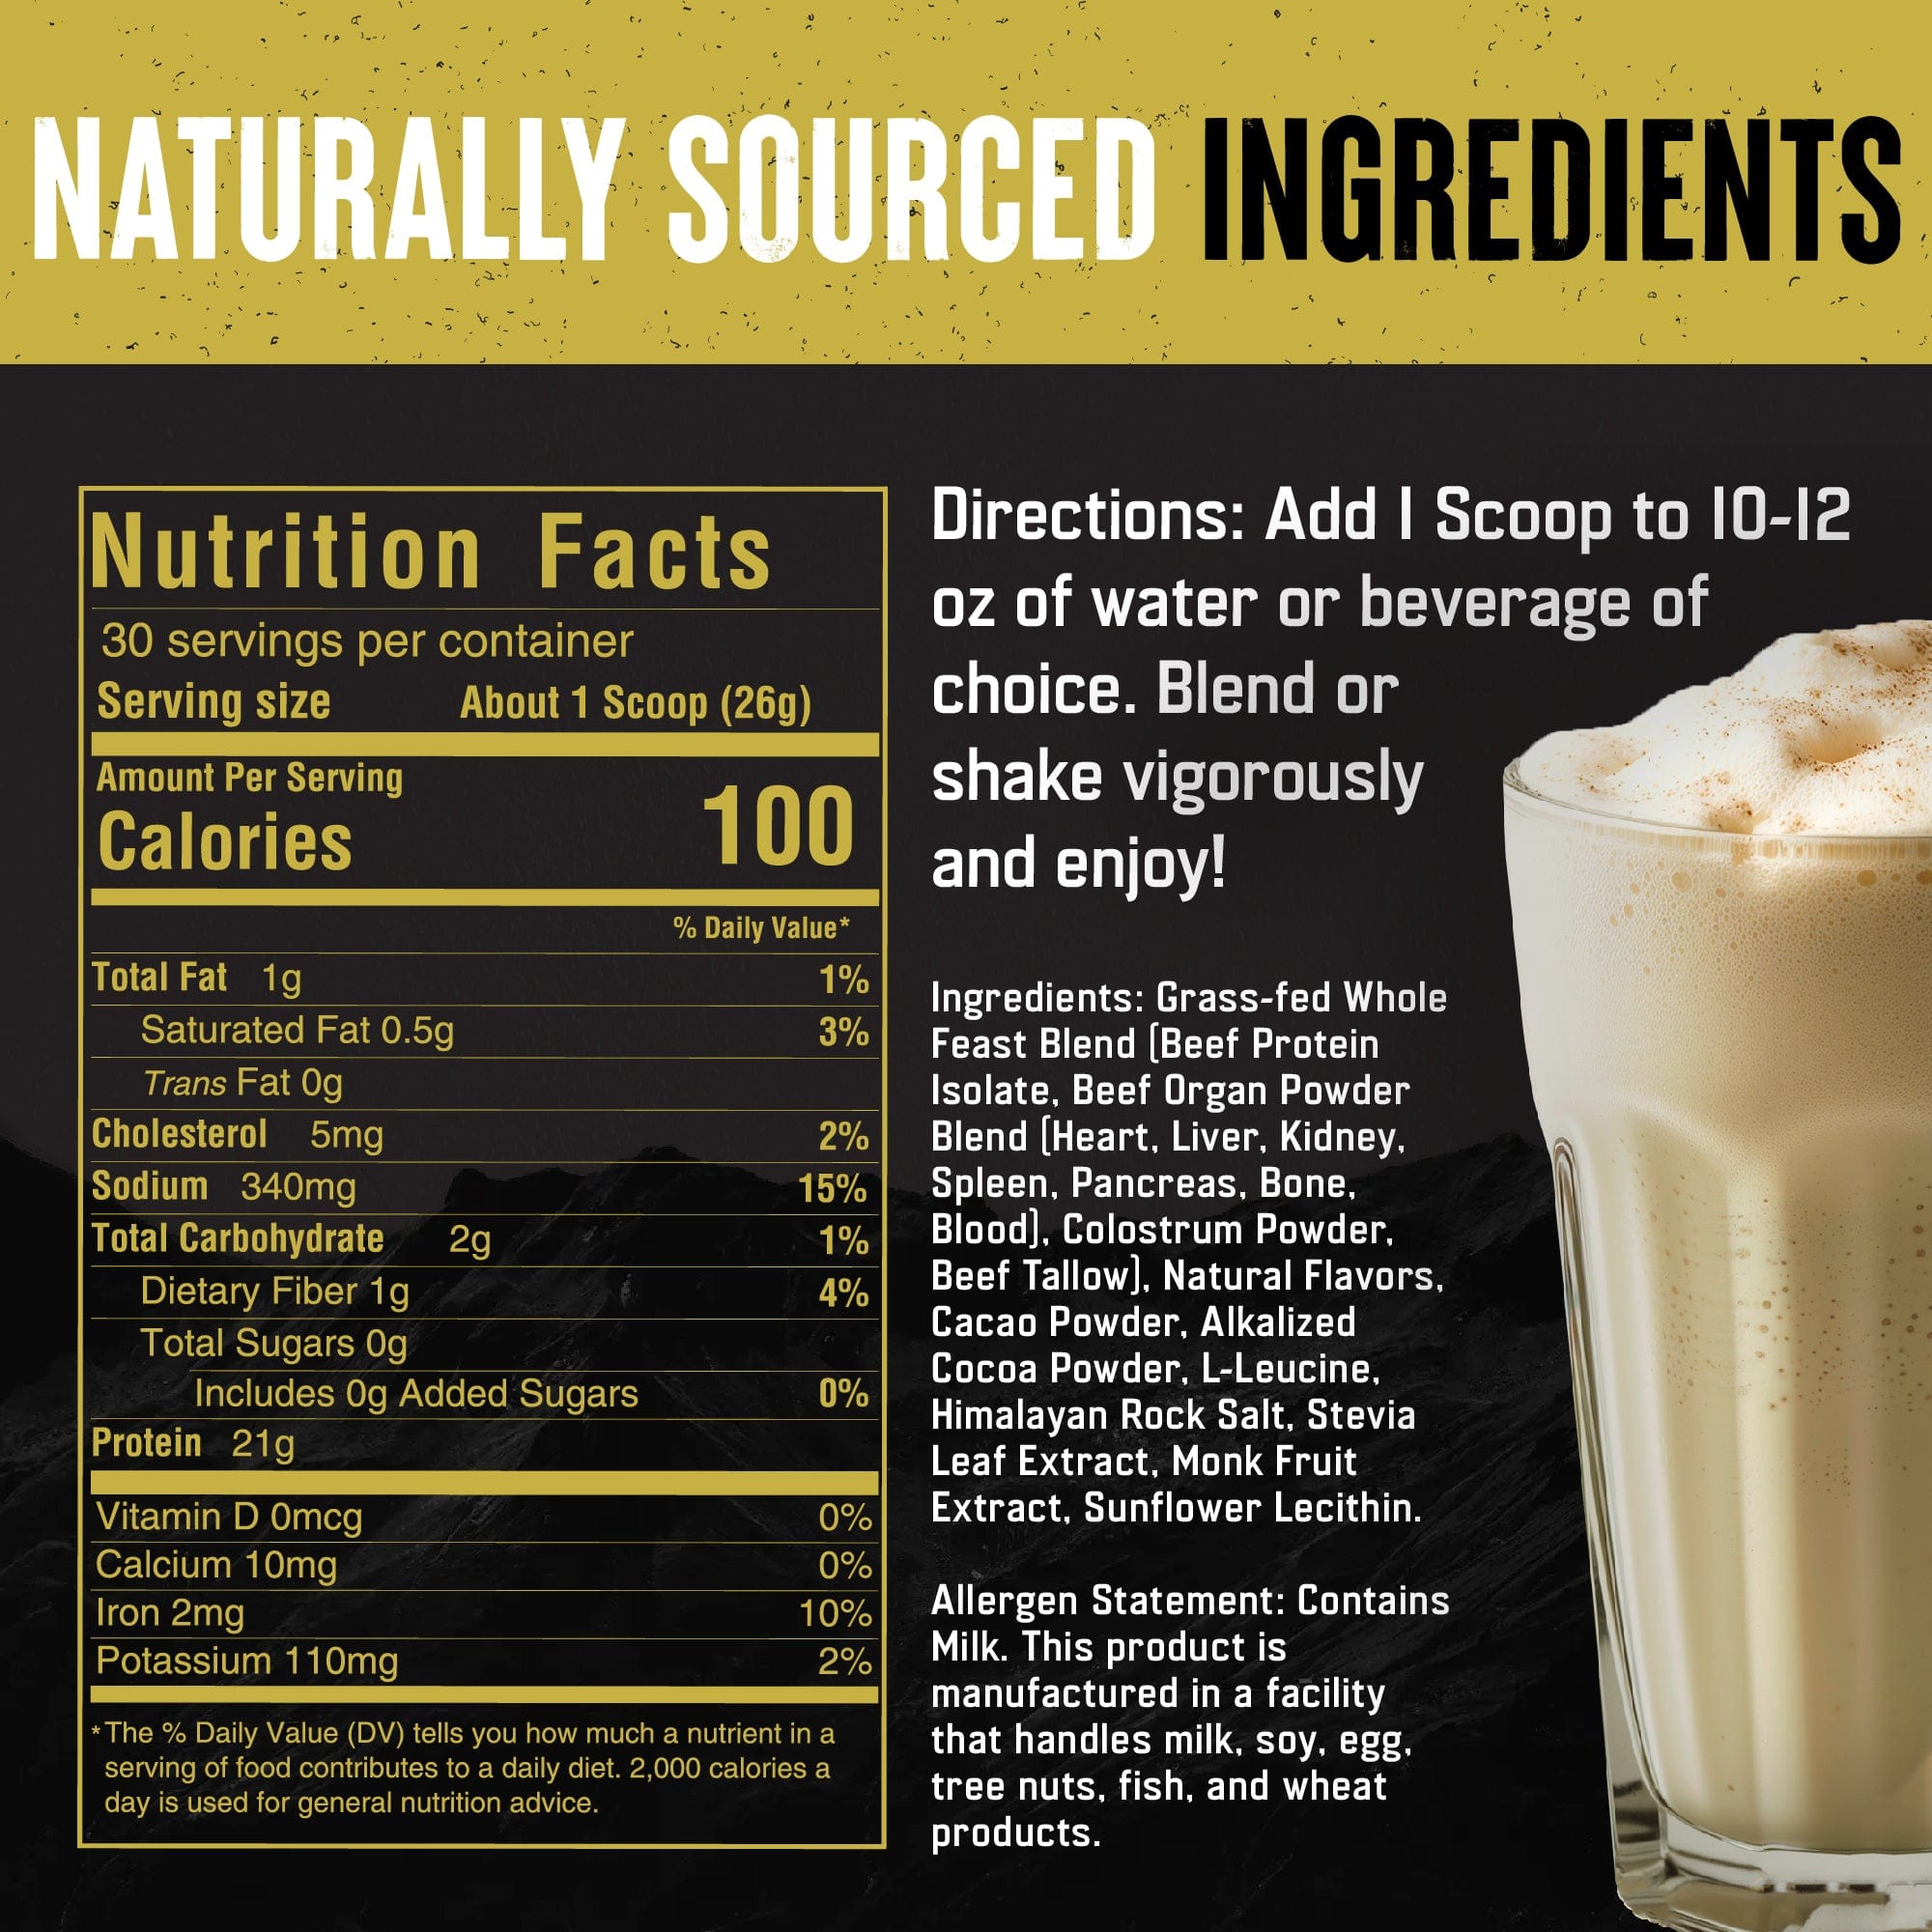 vanilla graphic with nutrition facts panel showing ingredients and directions 